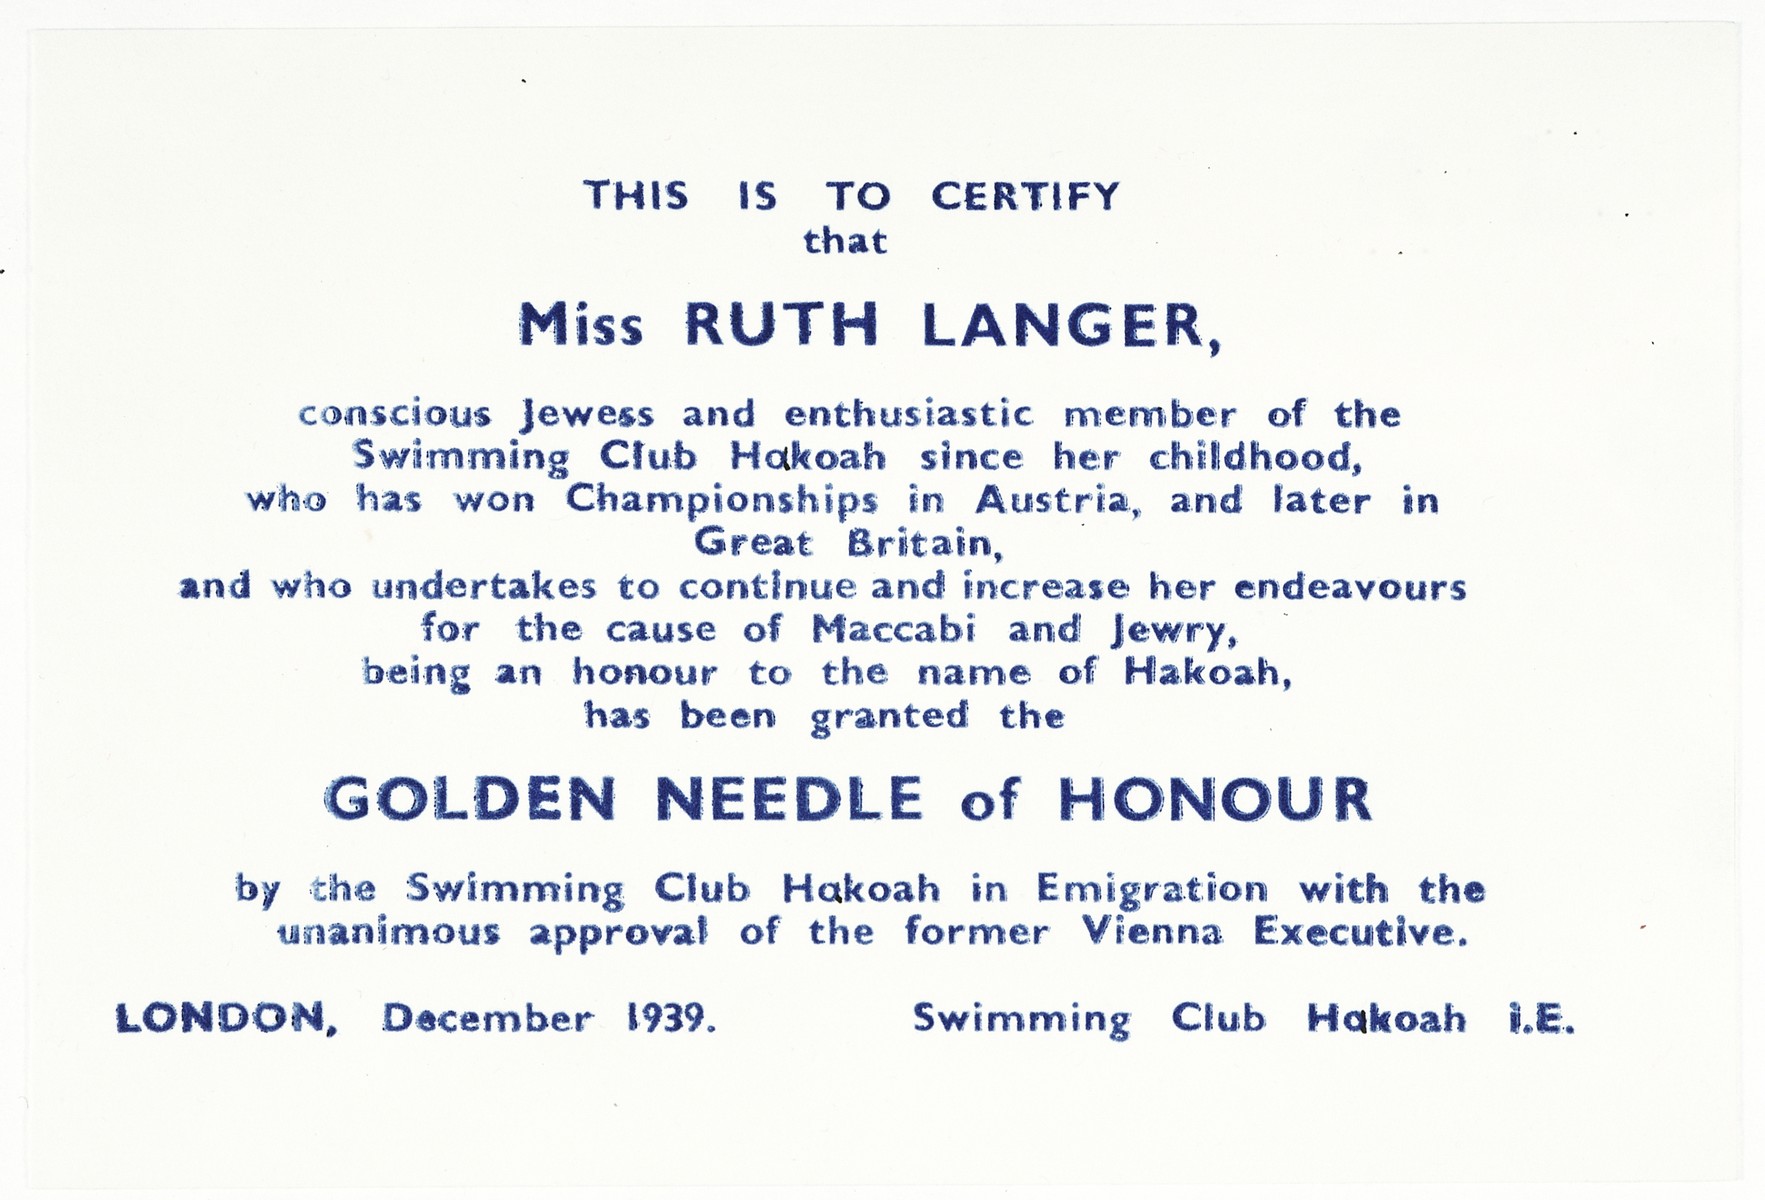 Certificate of award given to Ruth Langer for her contributions to the Hakoach Jewish swim club.